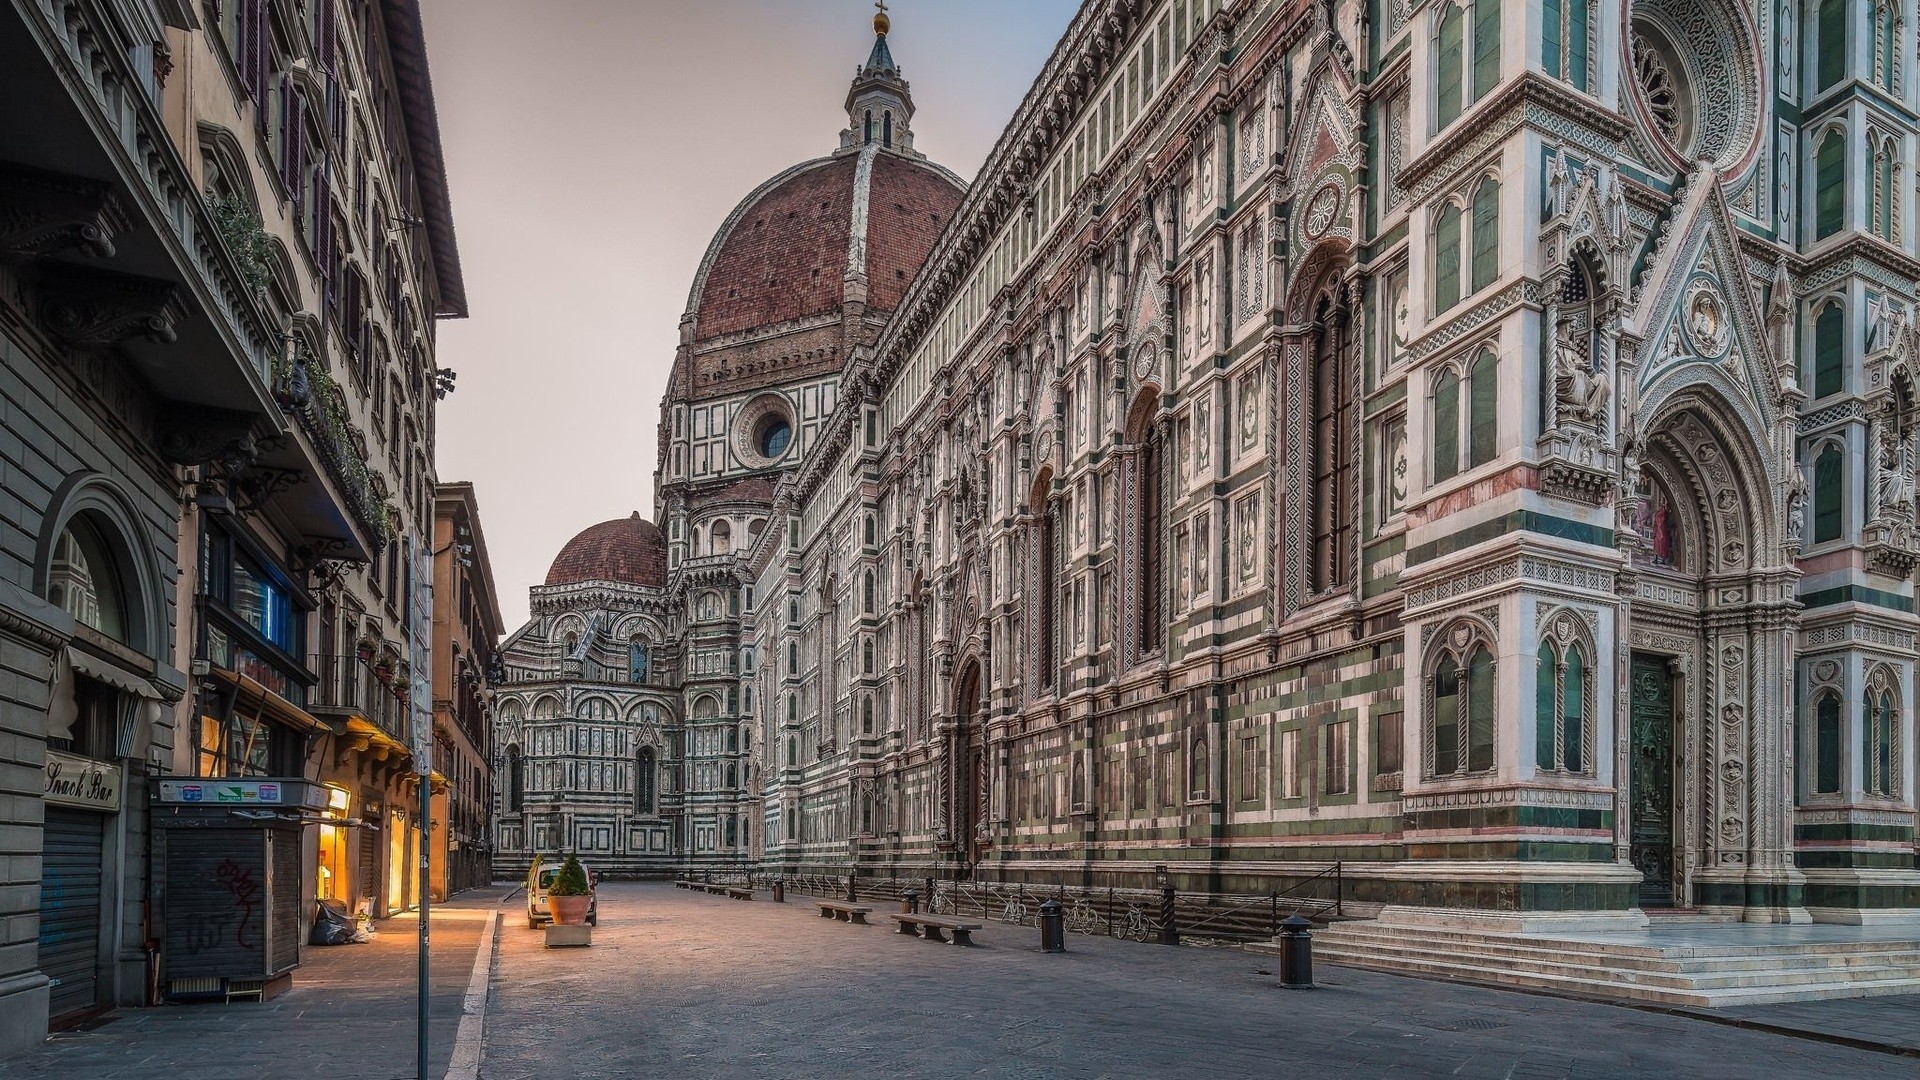 1920x1080 architecture old building town street urban florence italy lights cathedral arch gothic architecture dome bench car europe building evening wallpaper JPG 849 kB Gallery HD Wallpaper